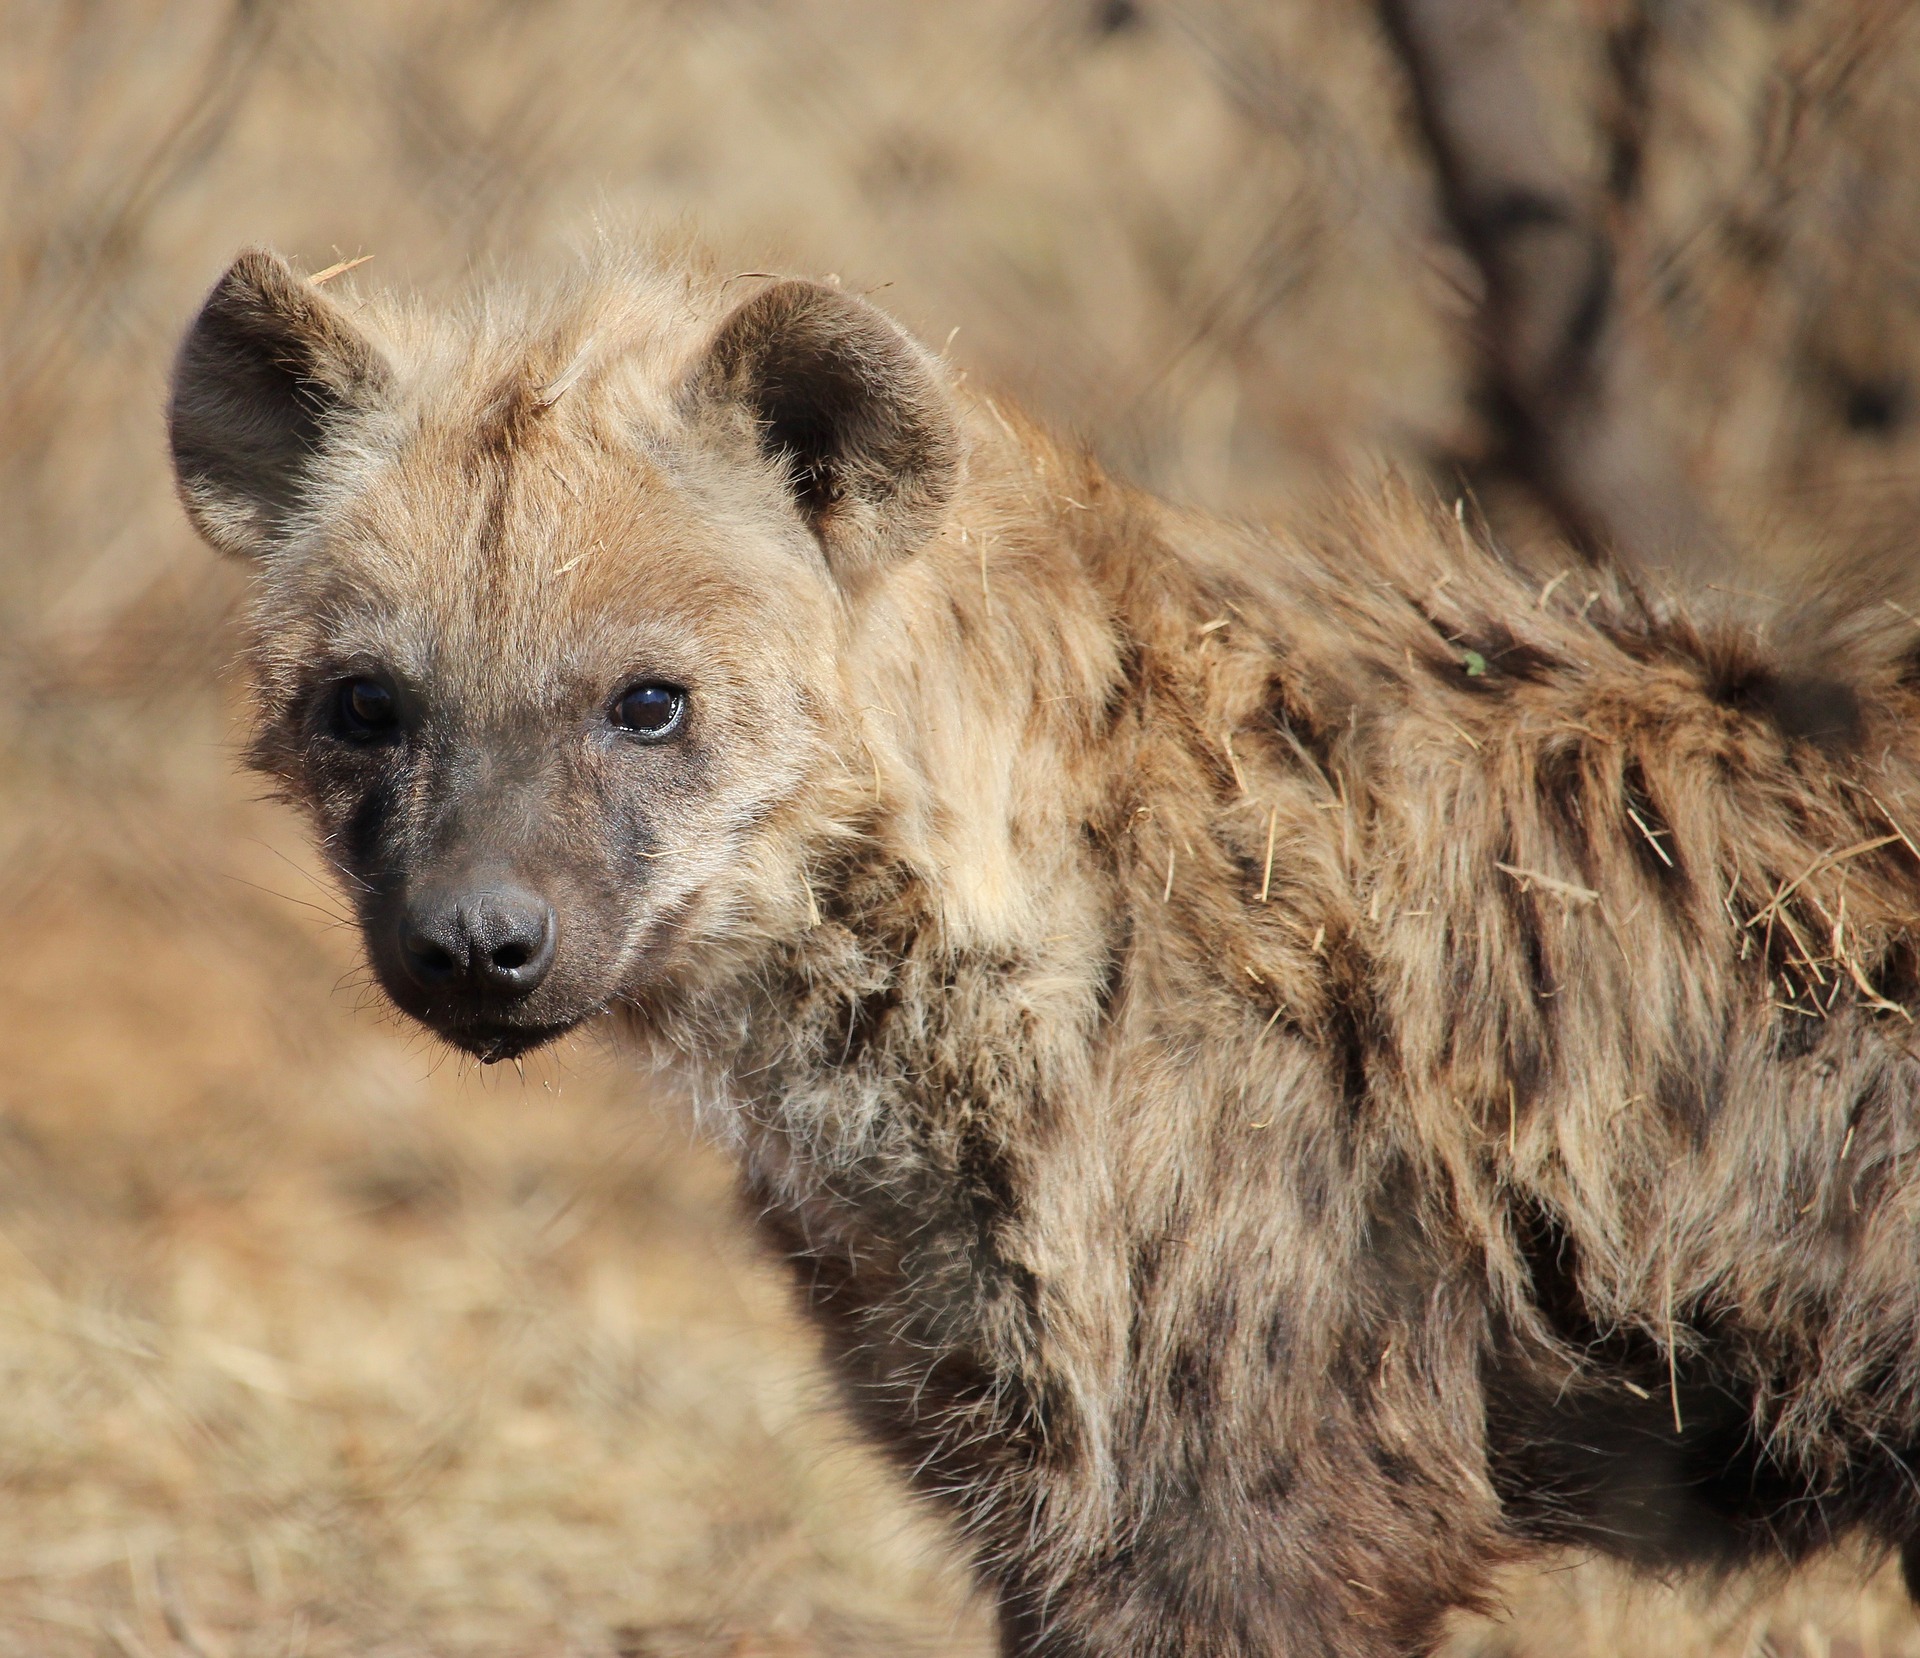 Confirmation of COVID-19 in Spotted Hyenas at a Colorado Zoo